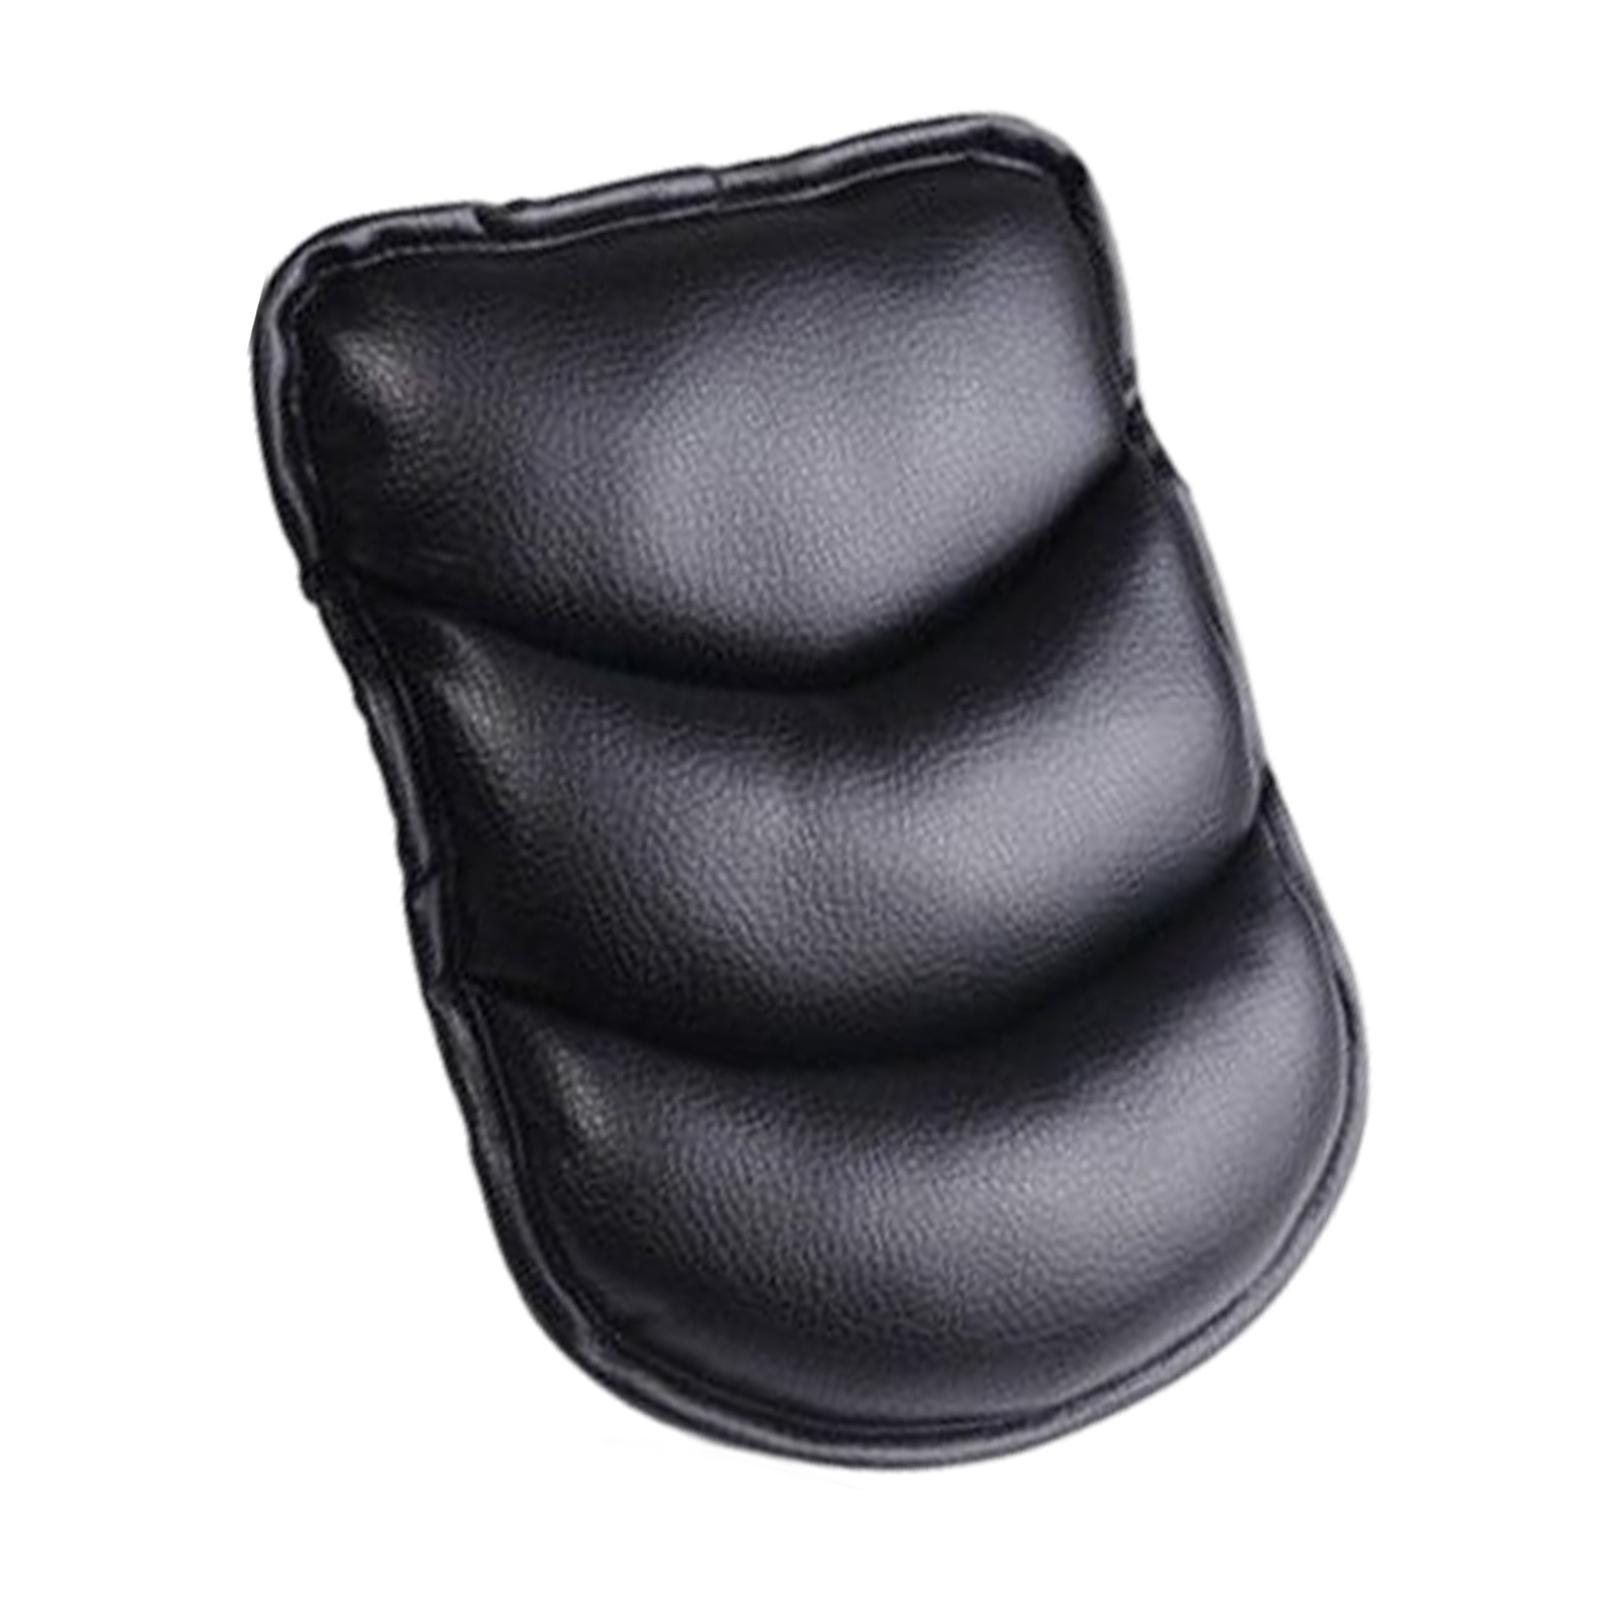 Car Armrest Cover Decor Accessories Easy to Install for Suvs Trucks